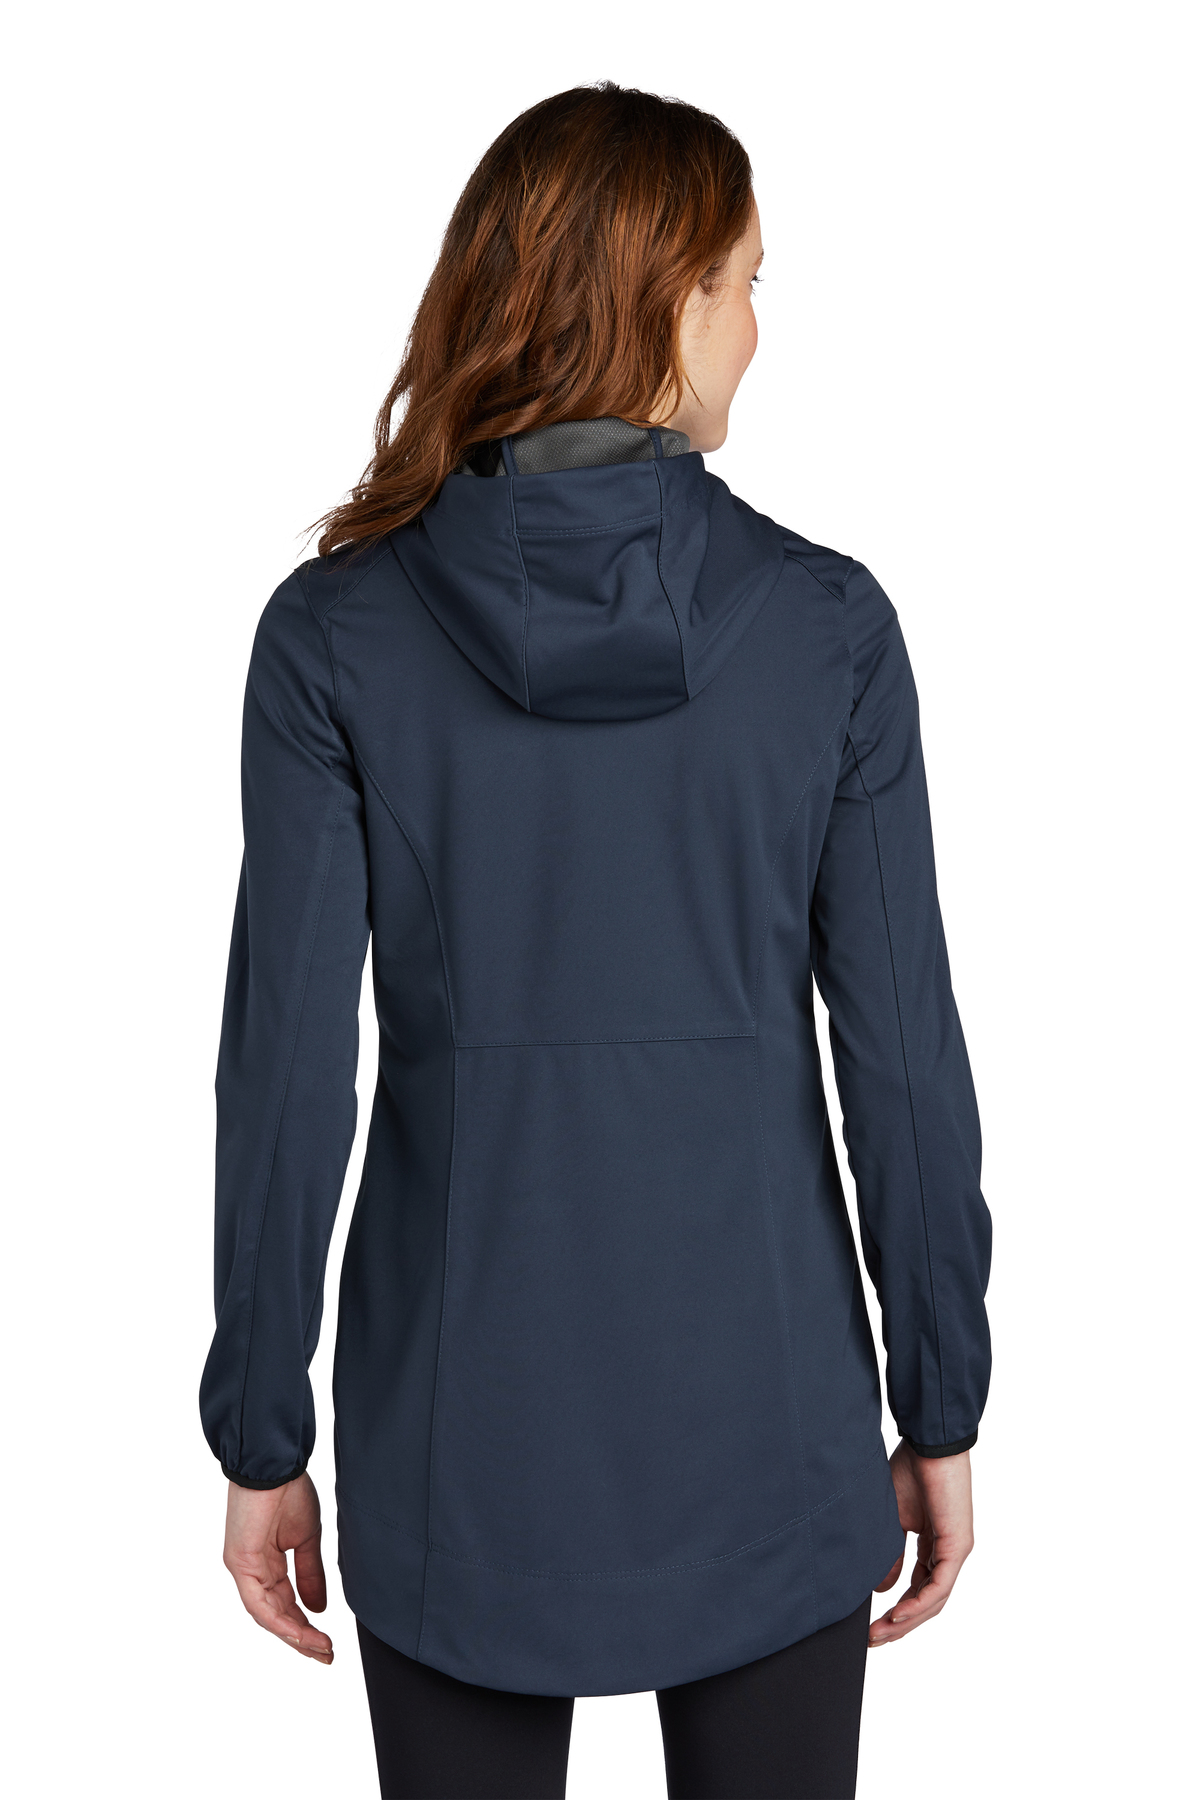 Port Authority Ladies Active Hooded Soft Shell Jacket | Product ...